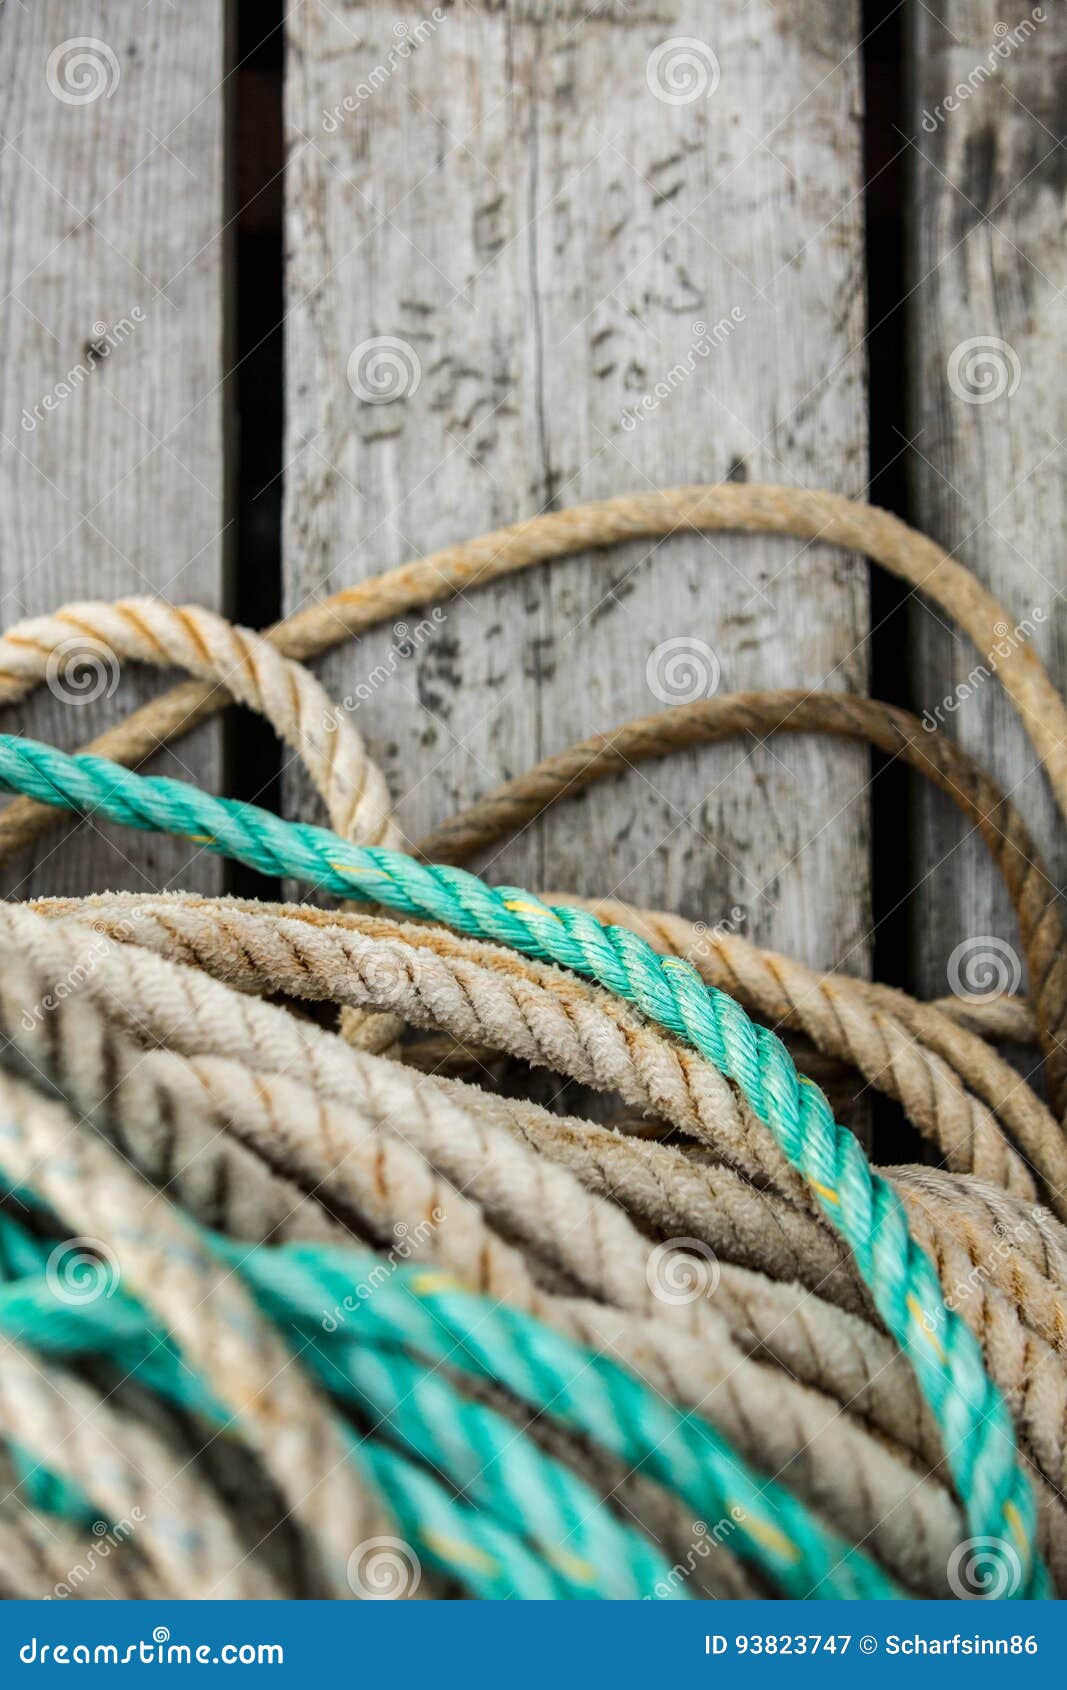 Fishing nets and floats stock image. Image of rope, fisherman - 93823747